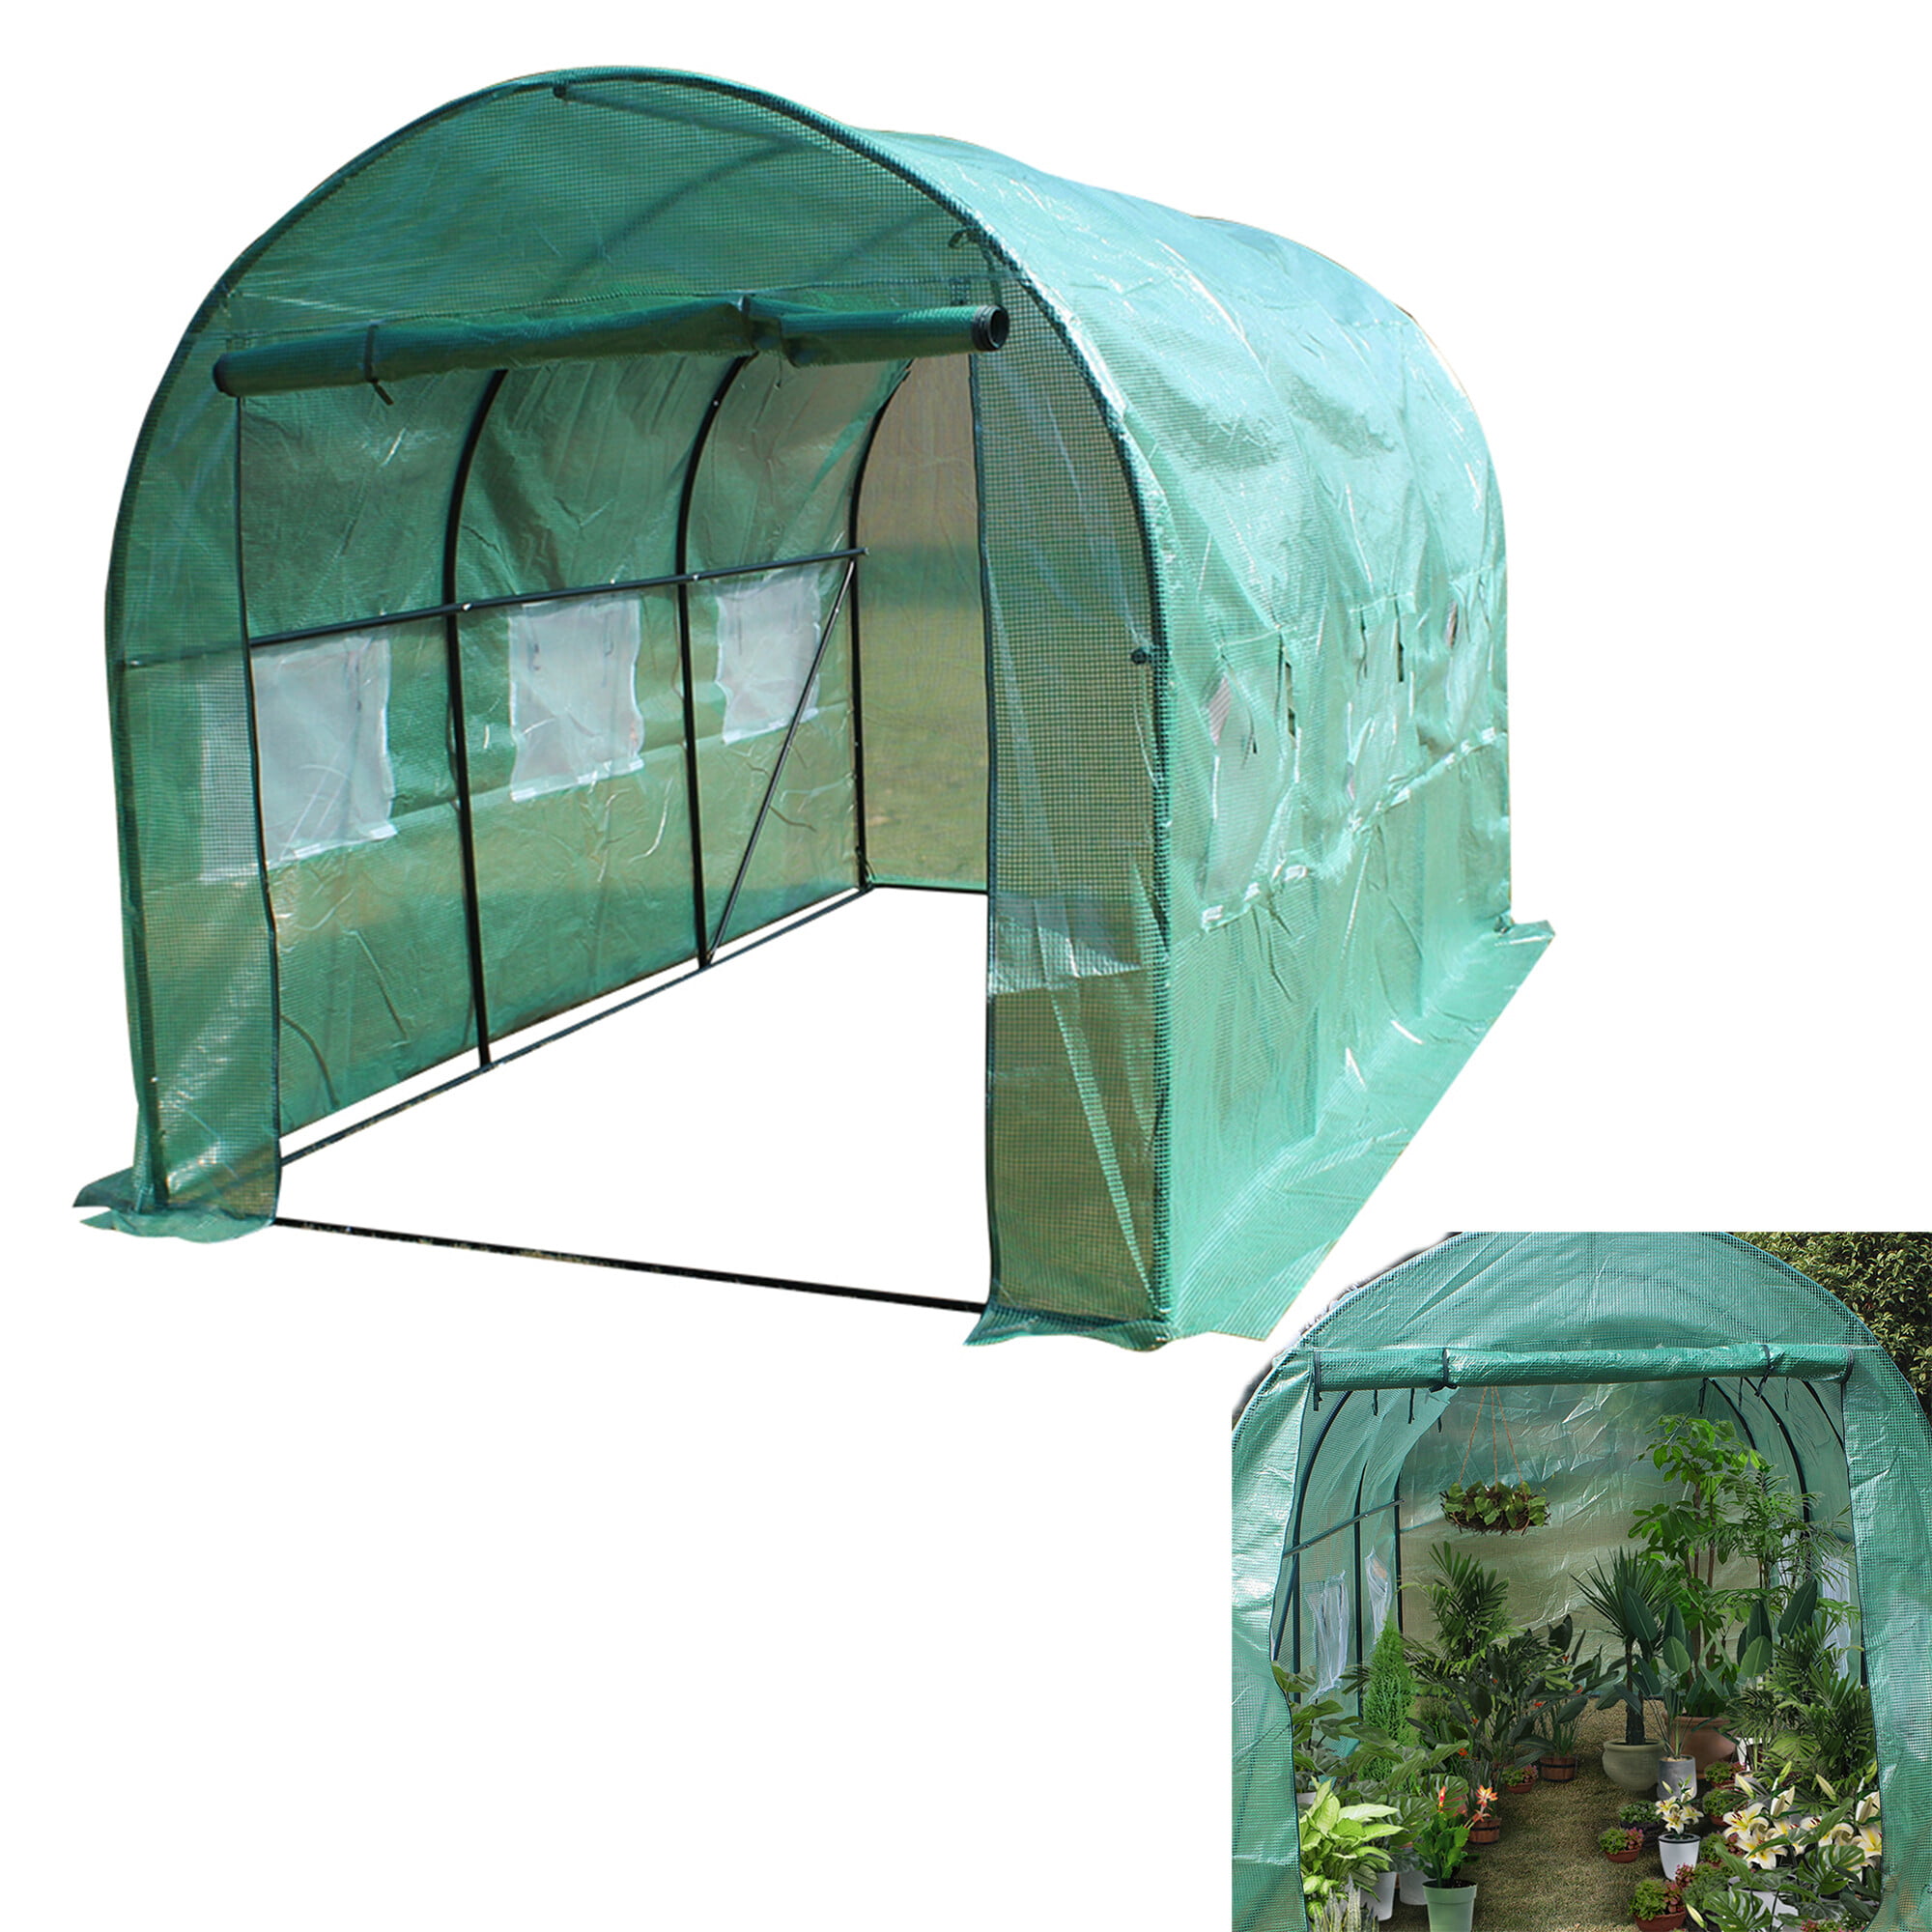 Details about   15x7x7ft Walk-in Greenhouse Tunnel Tent Gardening Accessory w/Roll-Up Windows 